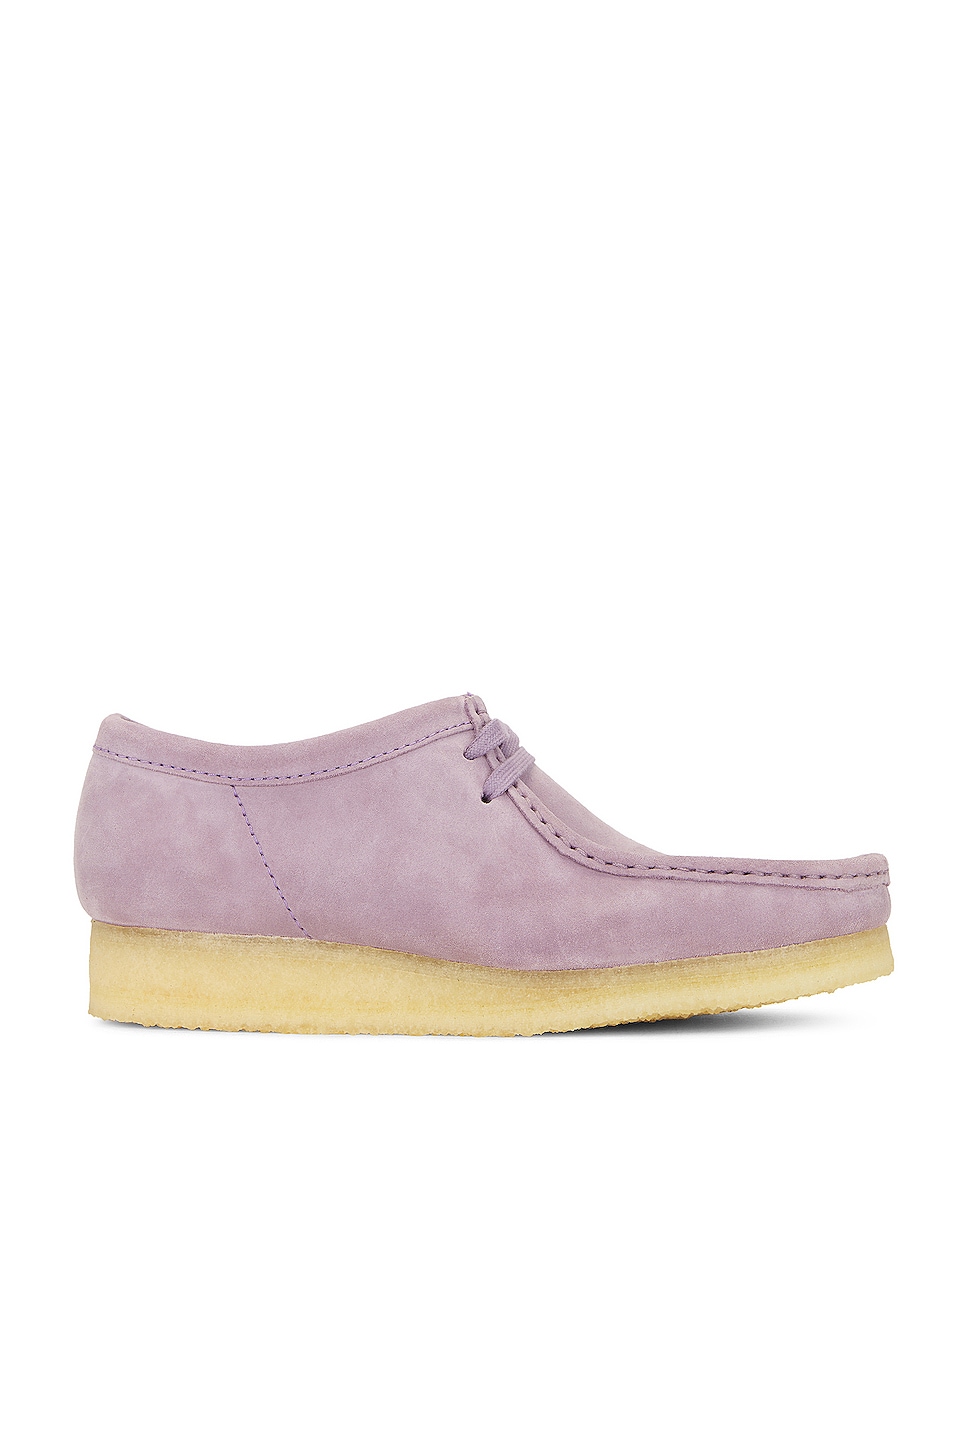 Image 1 of Clarks Wallabee in Mauve